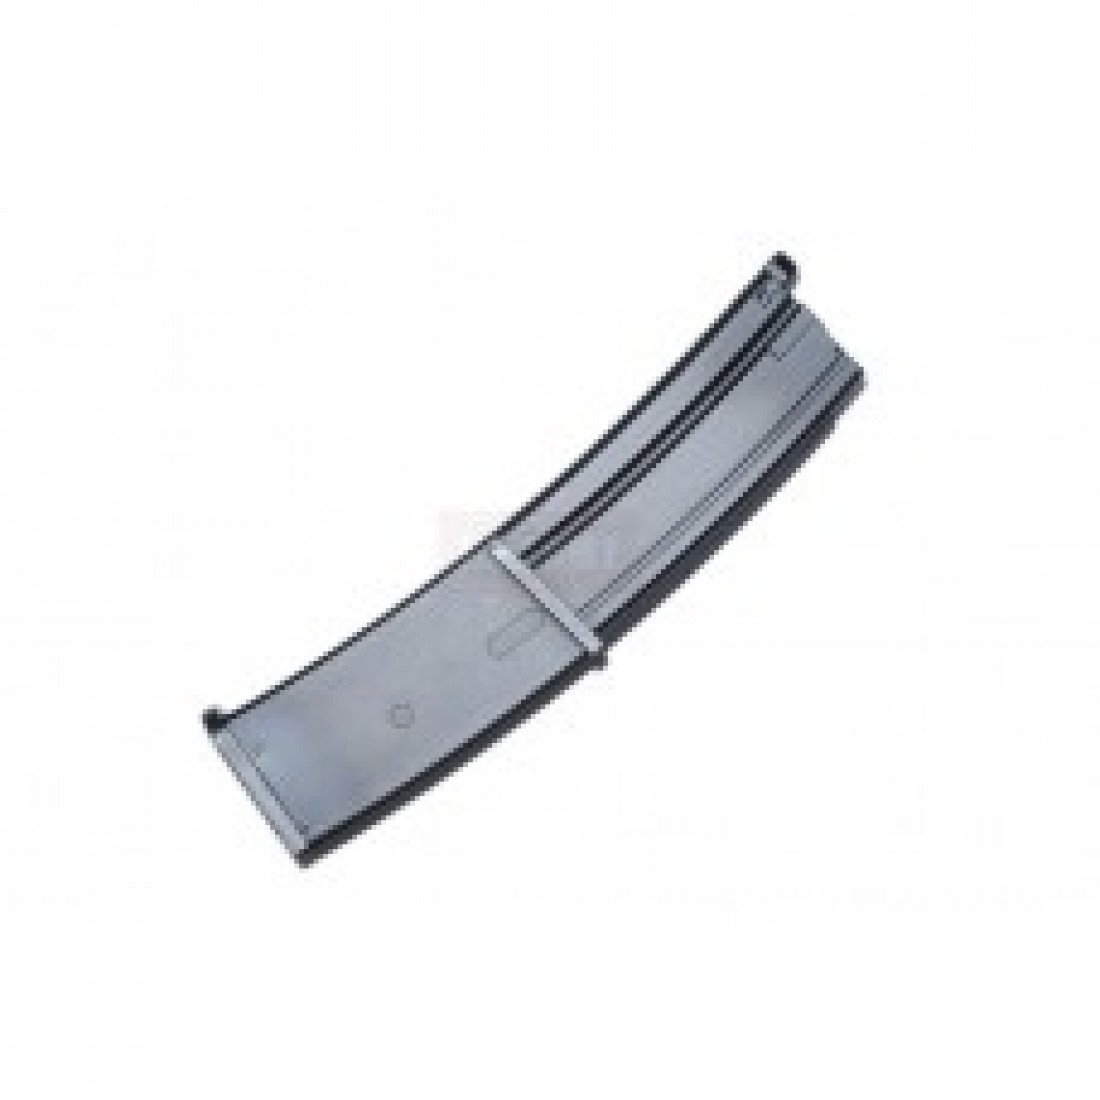 WE 40rds Airsoft Toy Gas Magazine For SMG 8 MP7 Series GBB Black WE-MAG-048 